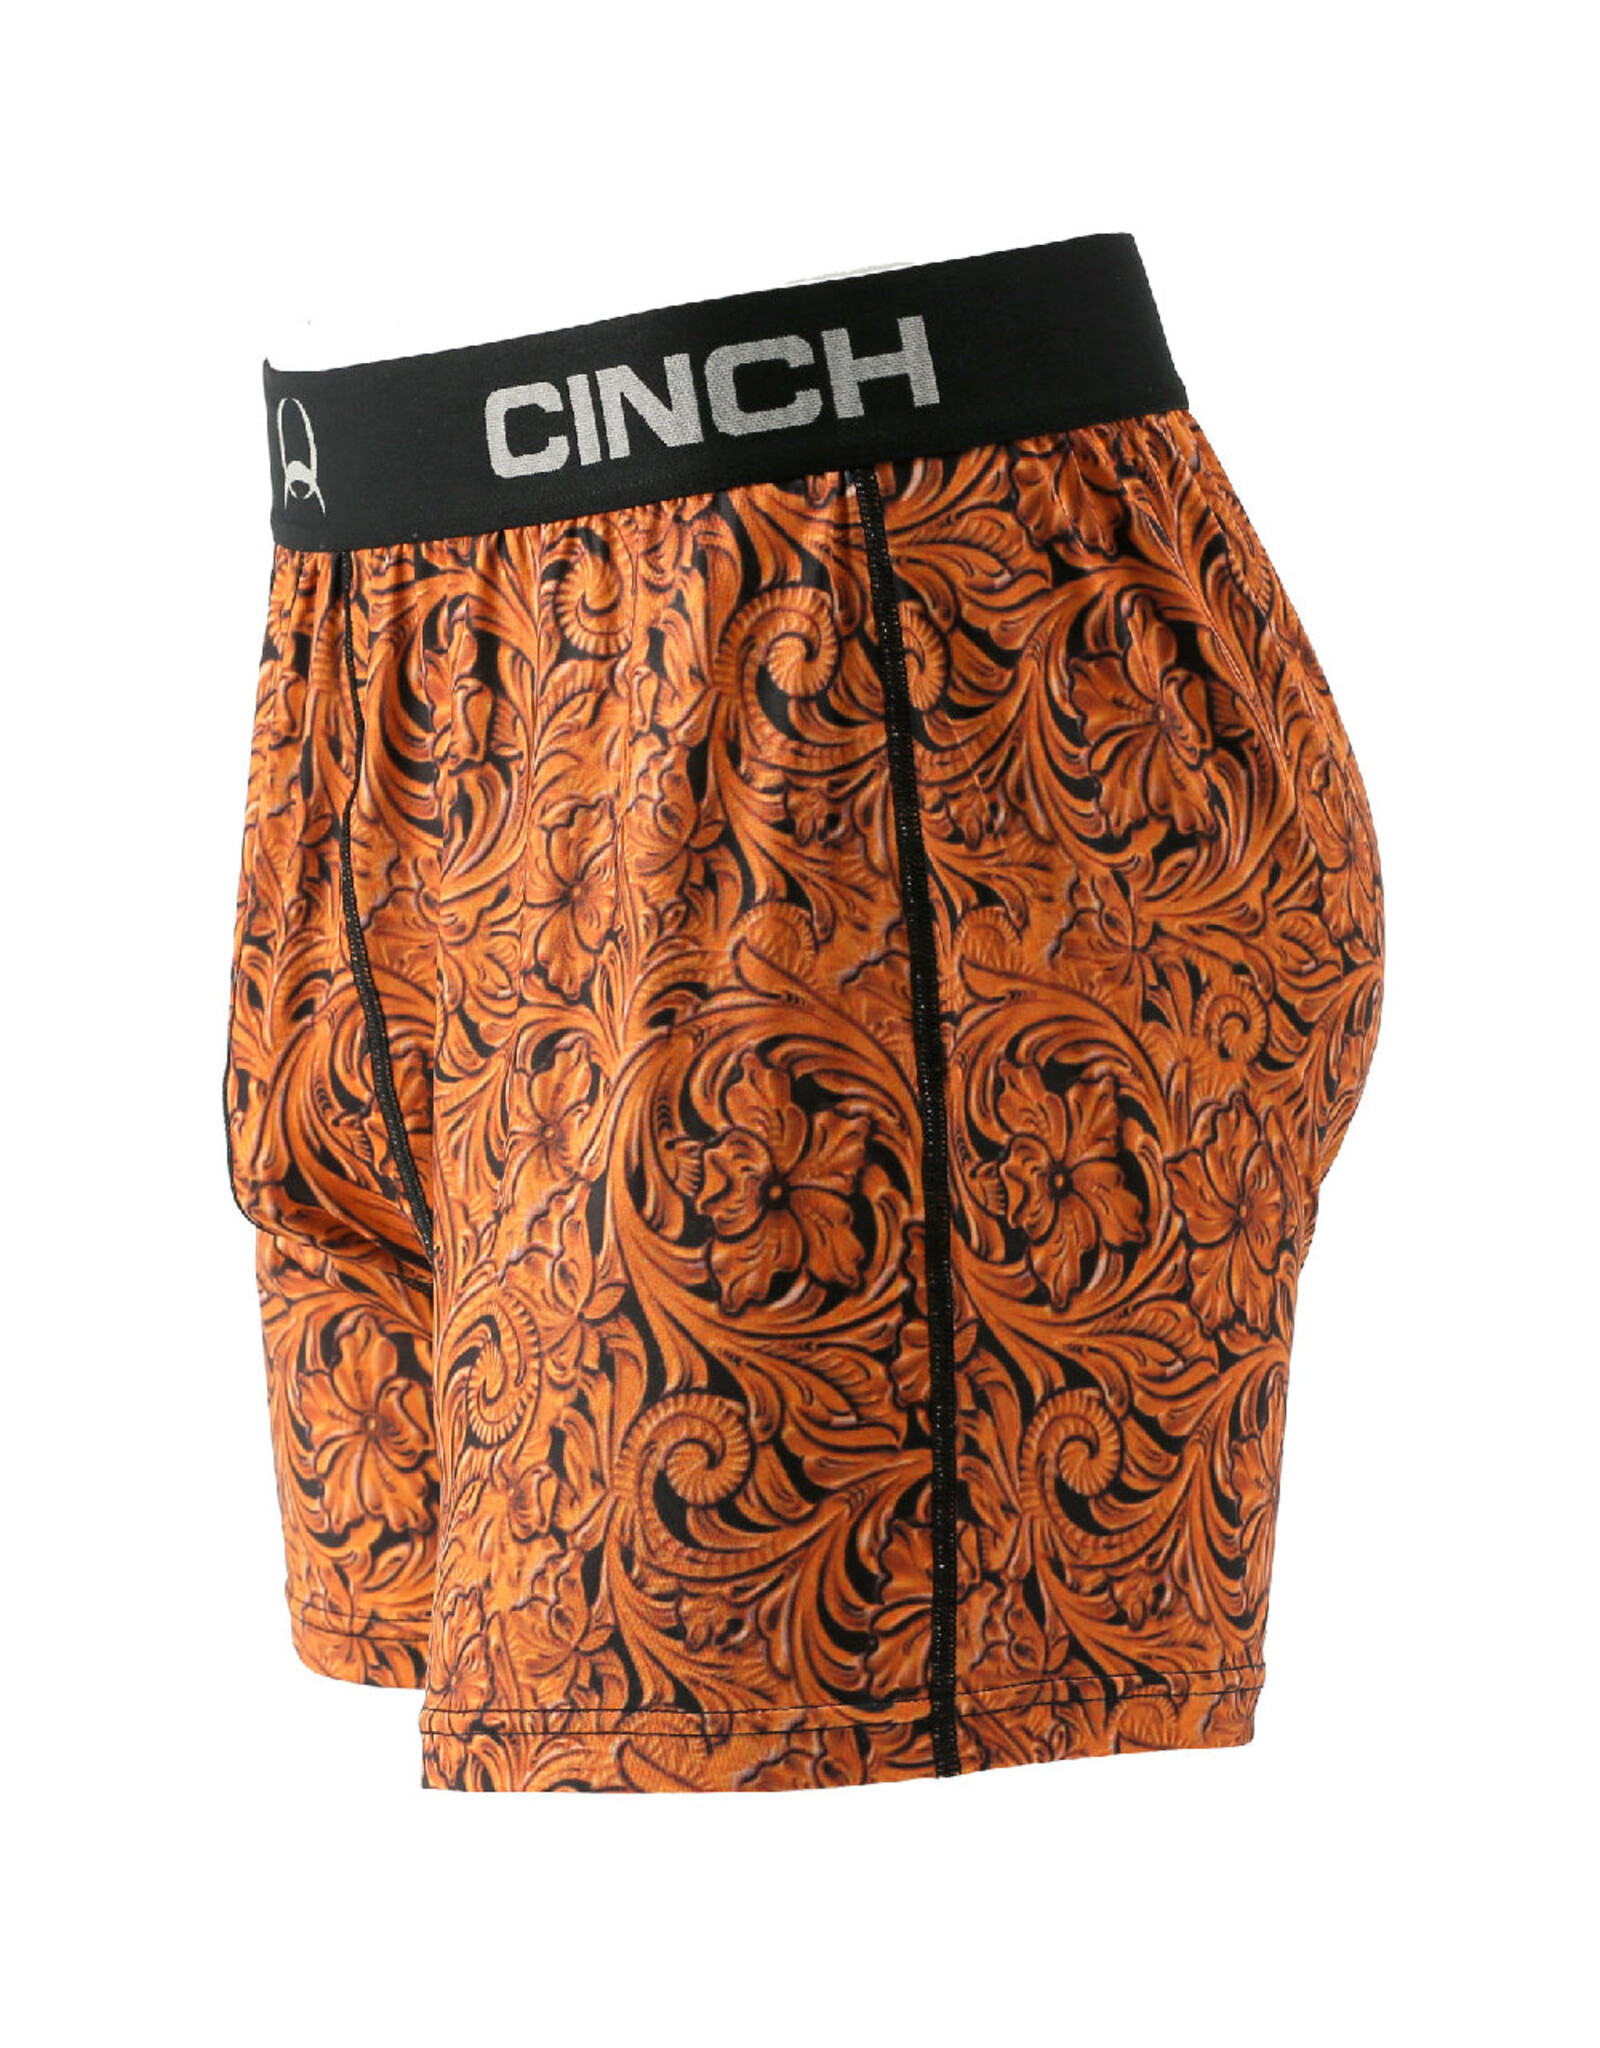 Cinch Cinch Loose Fit Leather Boxer